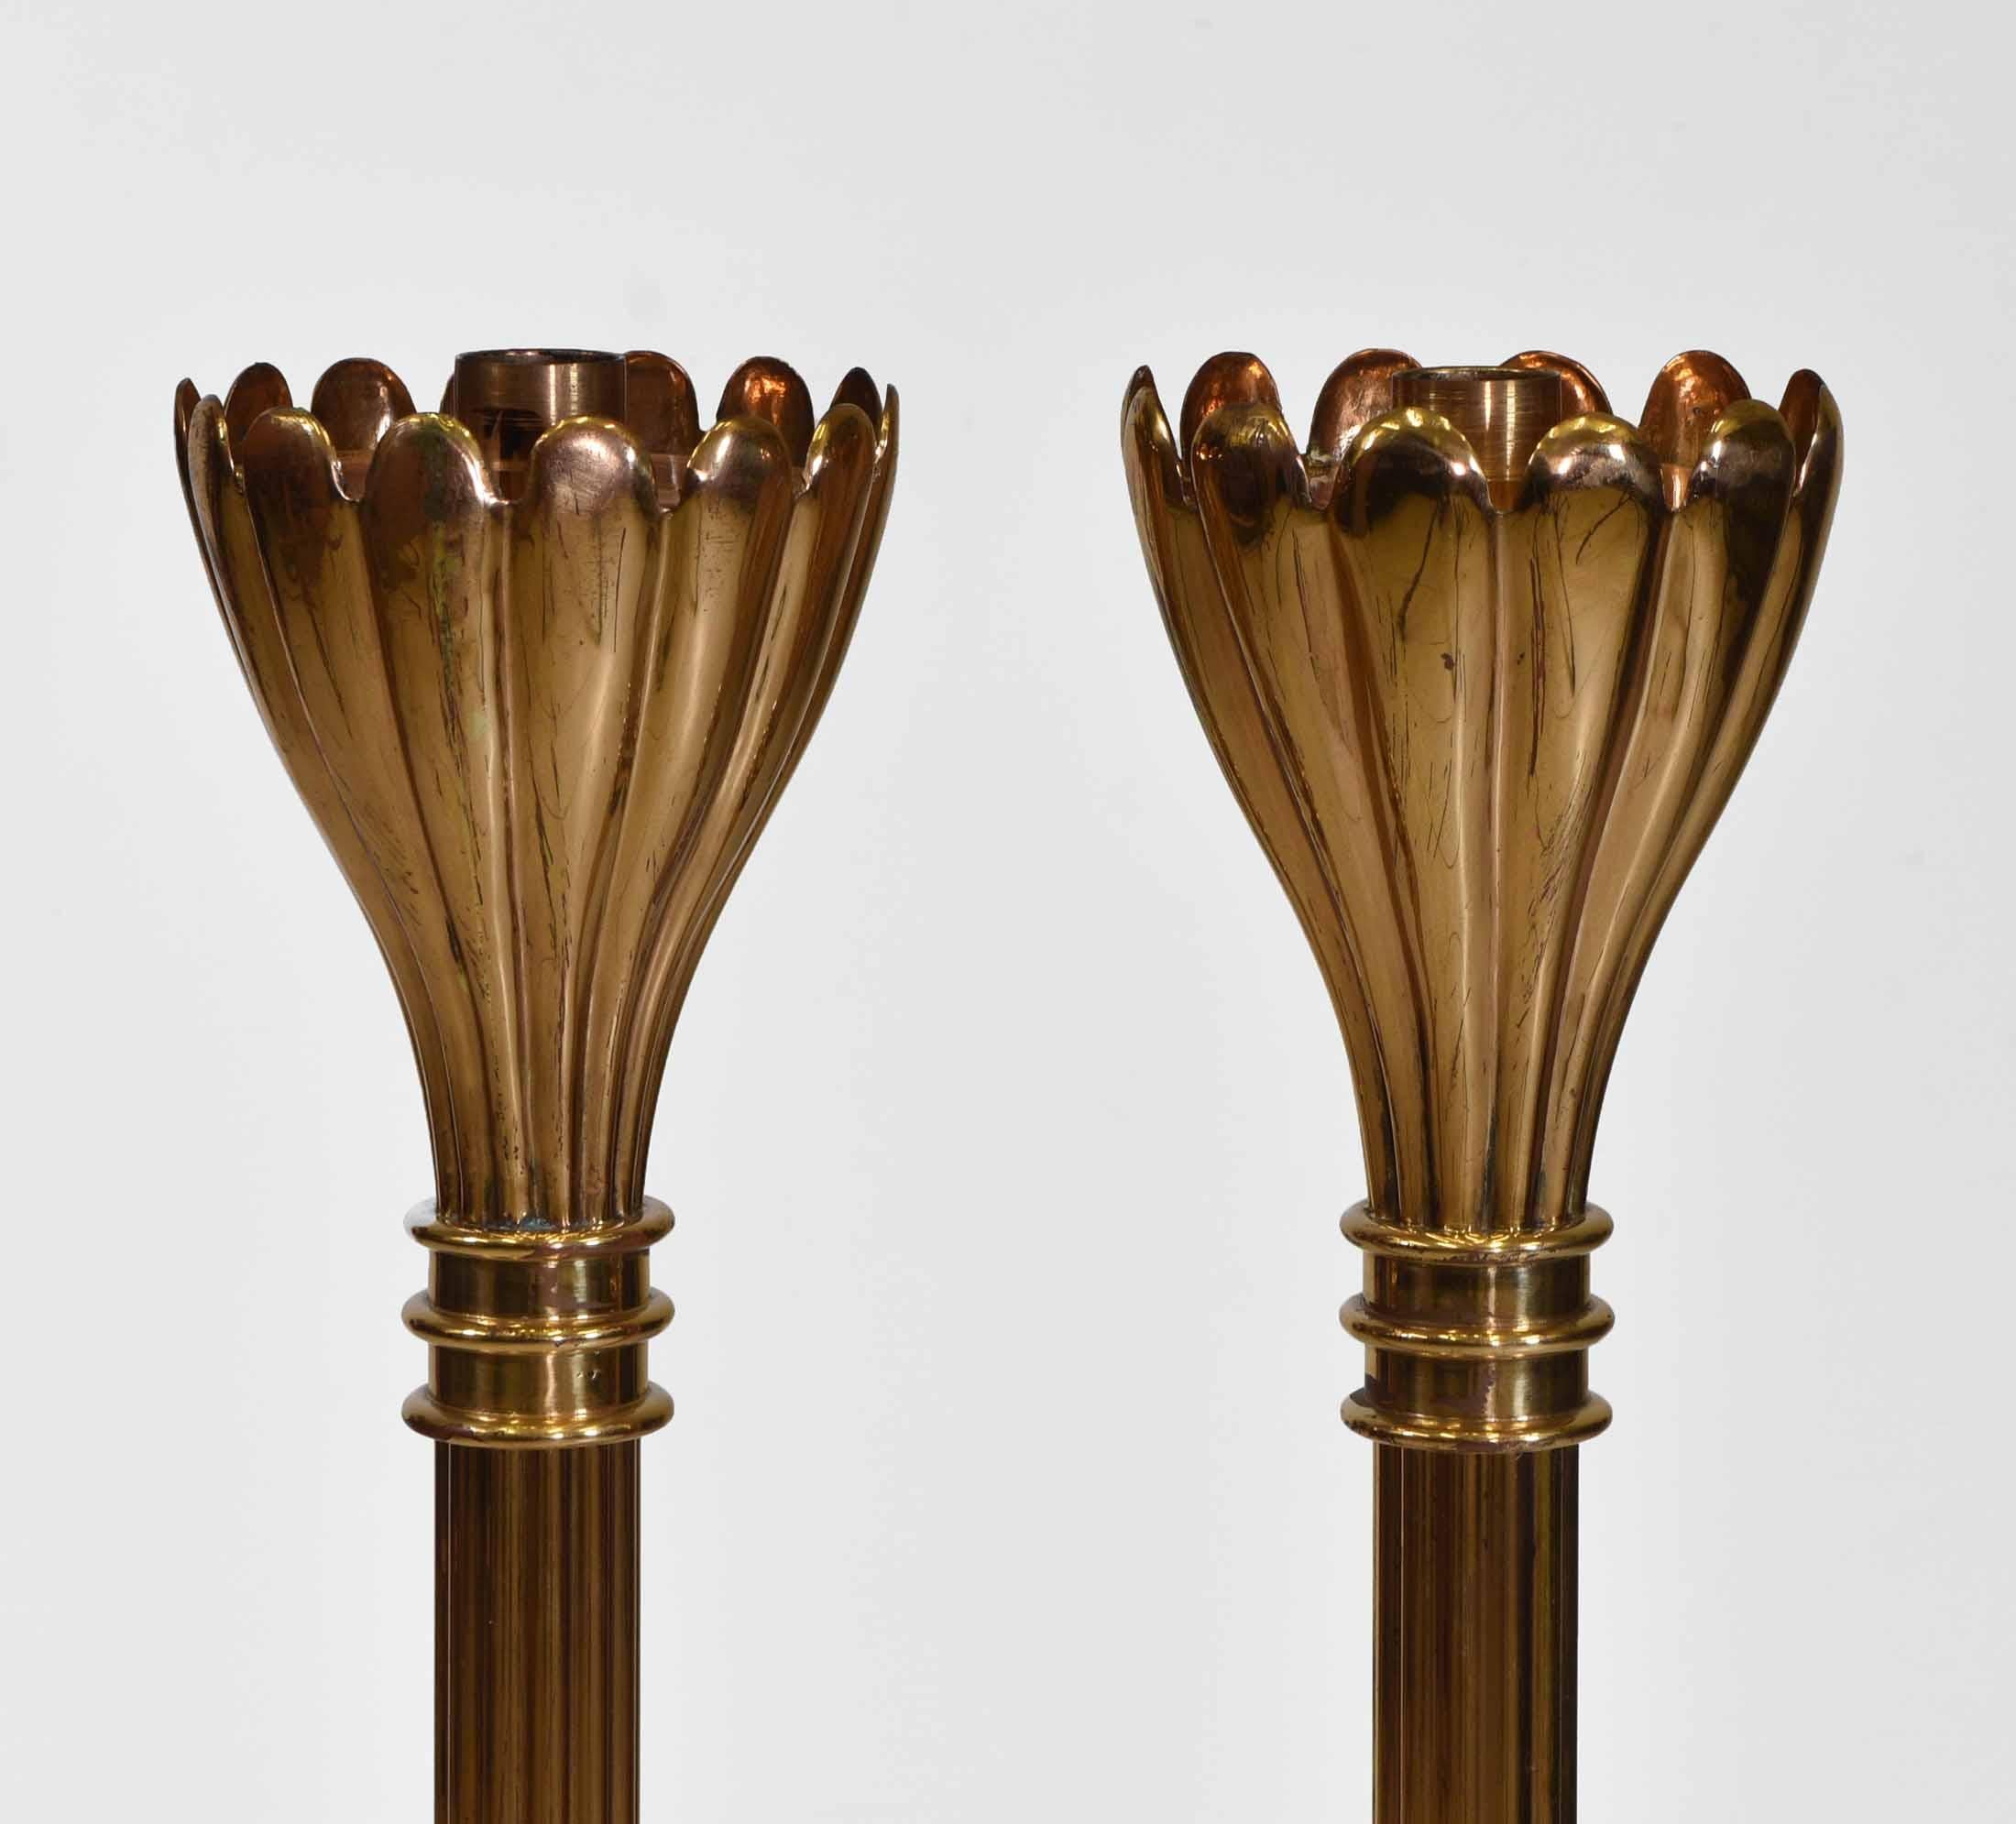 A pair of brass fluted floor standing candle stands with flared scalloped uppers and copper inset tops. Circa early to mid 20th century.

They have weighted bases, each one weighing 6kg. The candle diameter is 3cm. Two pairs available. 

There